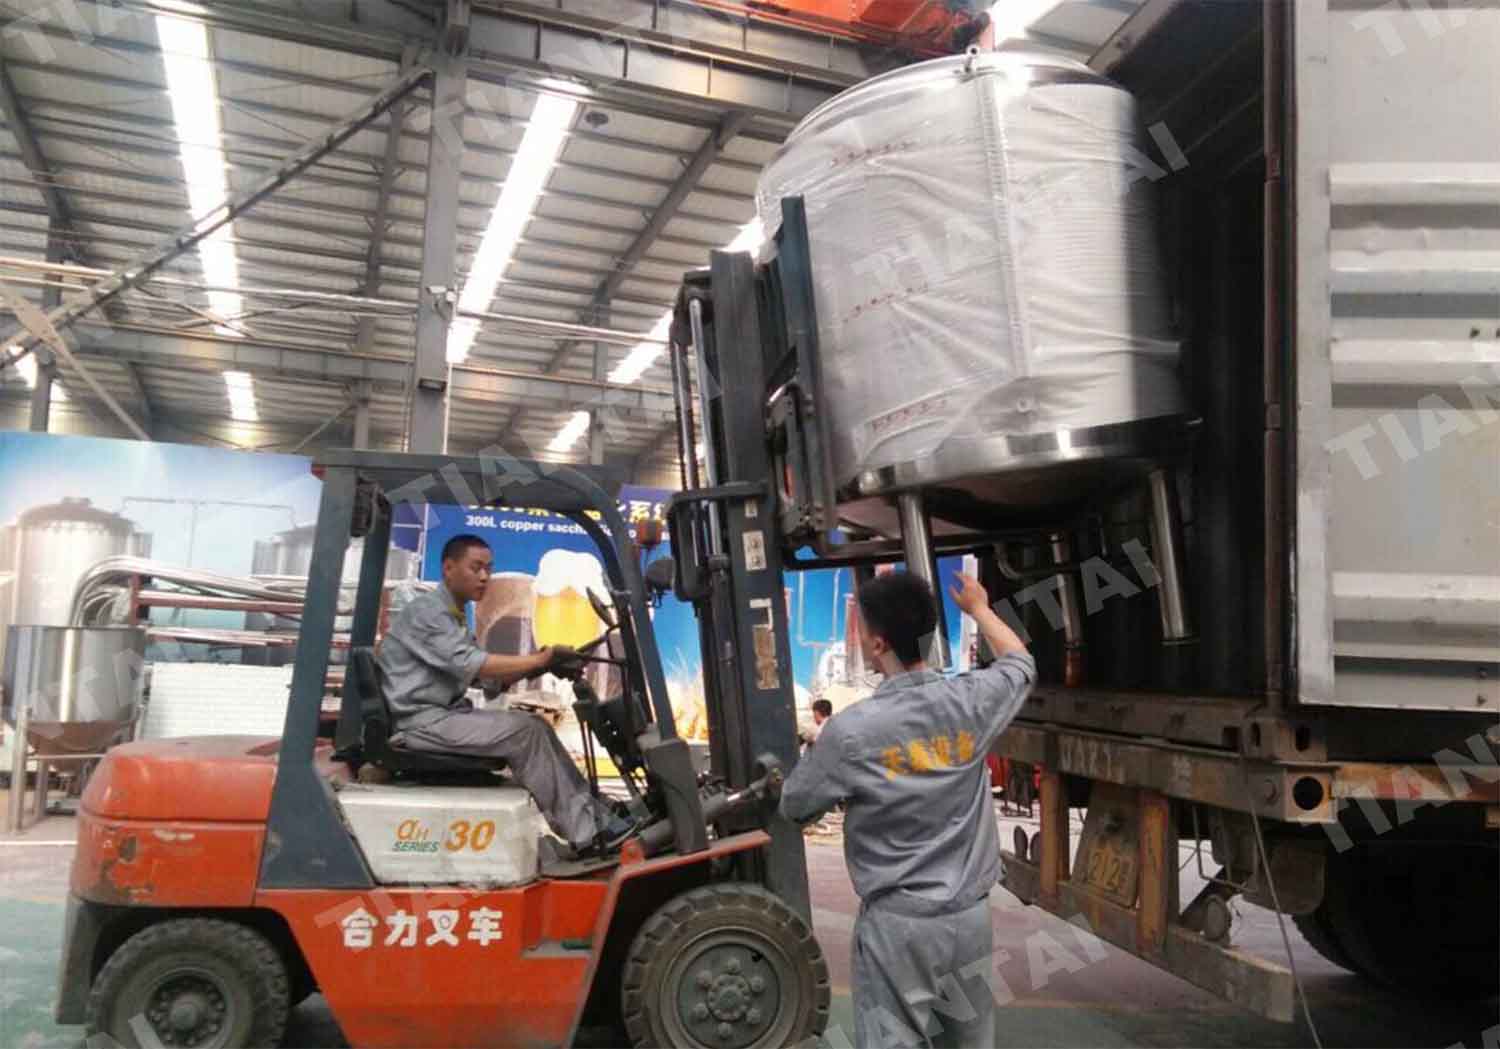 The 2000L brite tanks delivered to Singapore